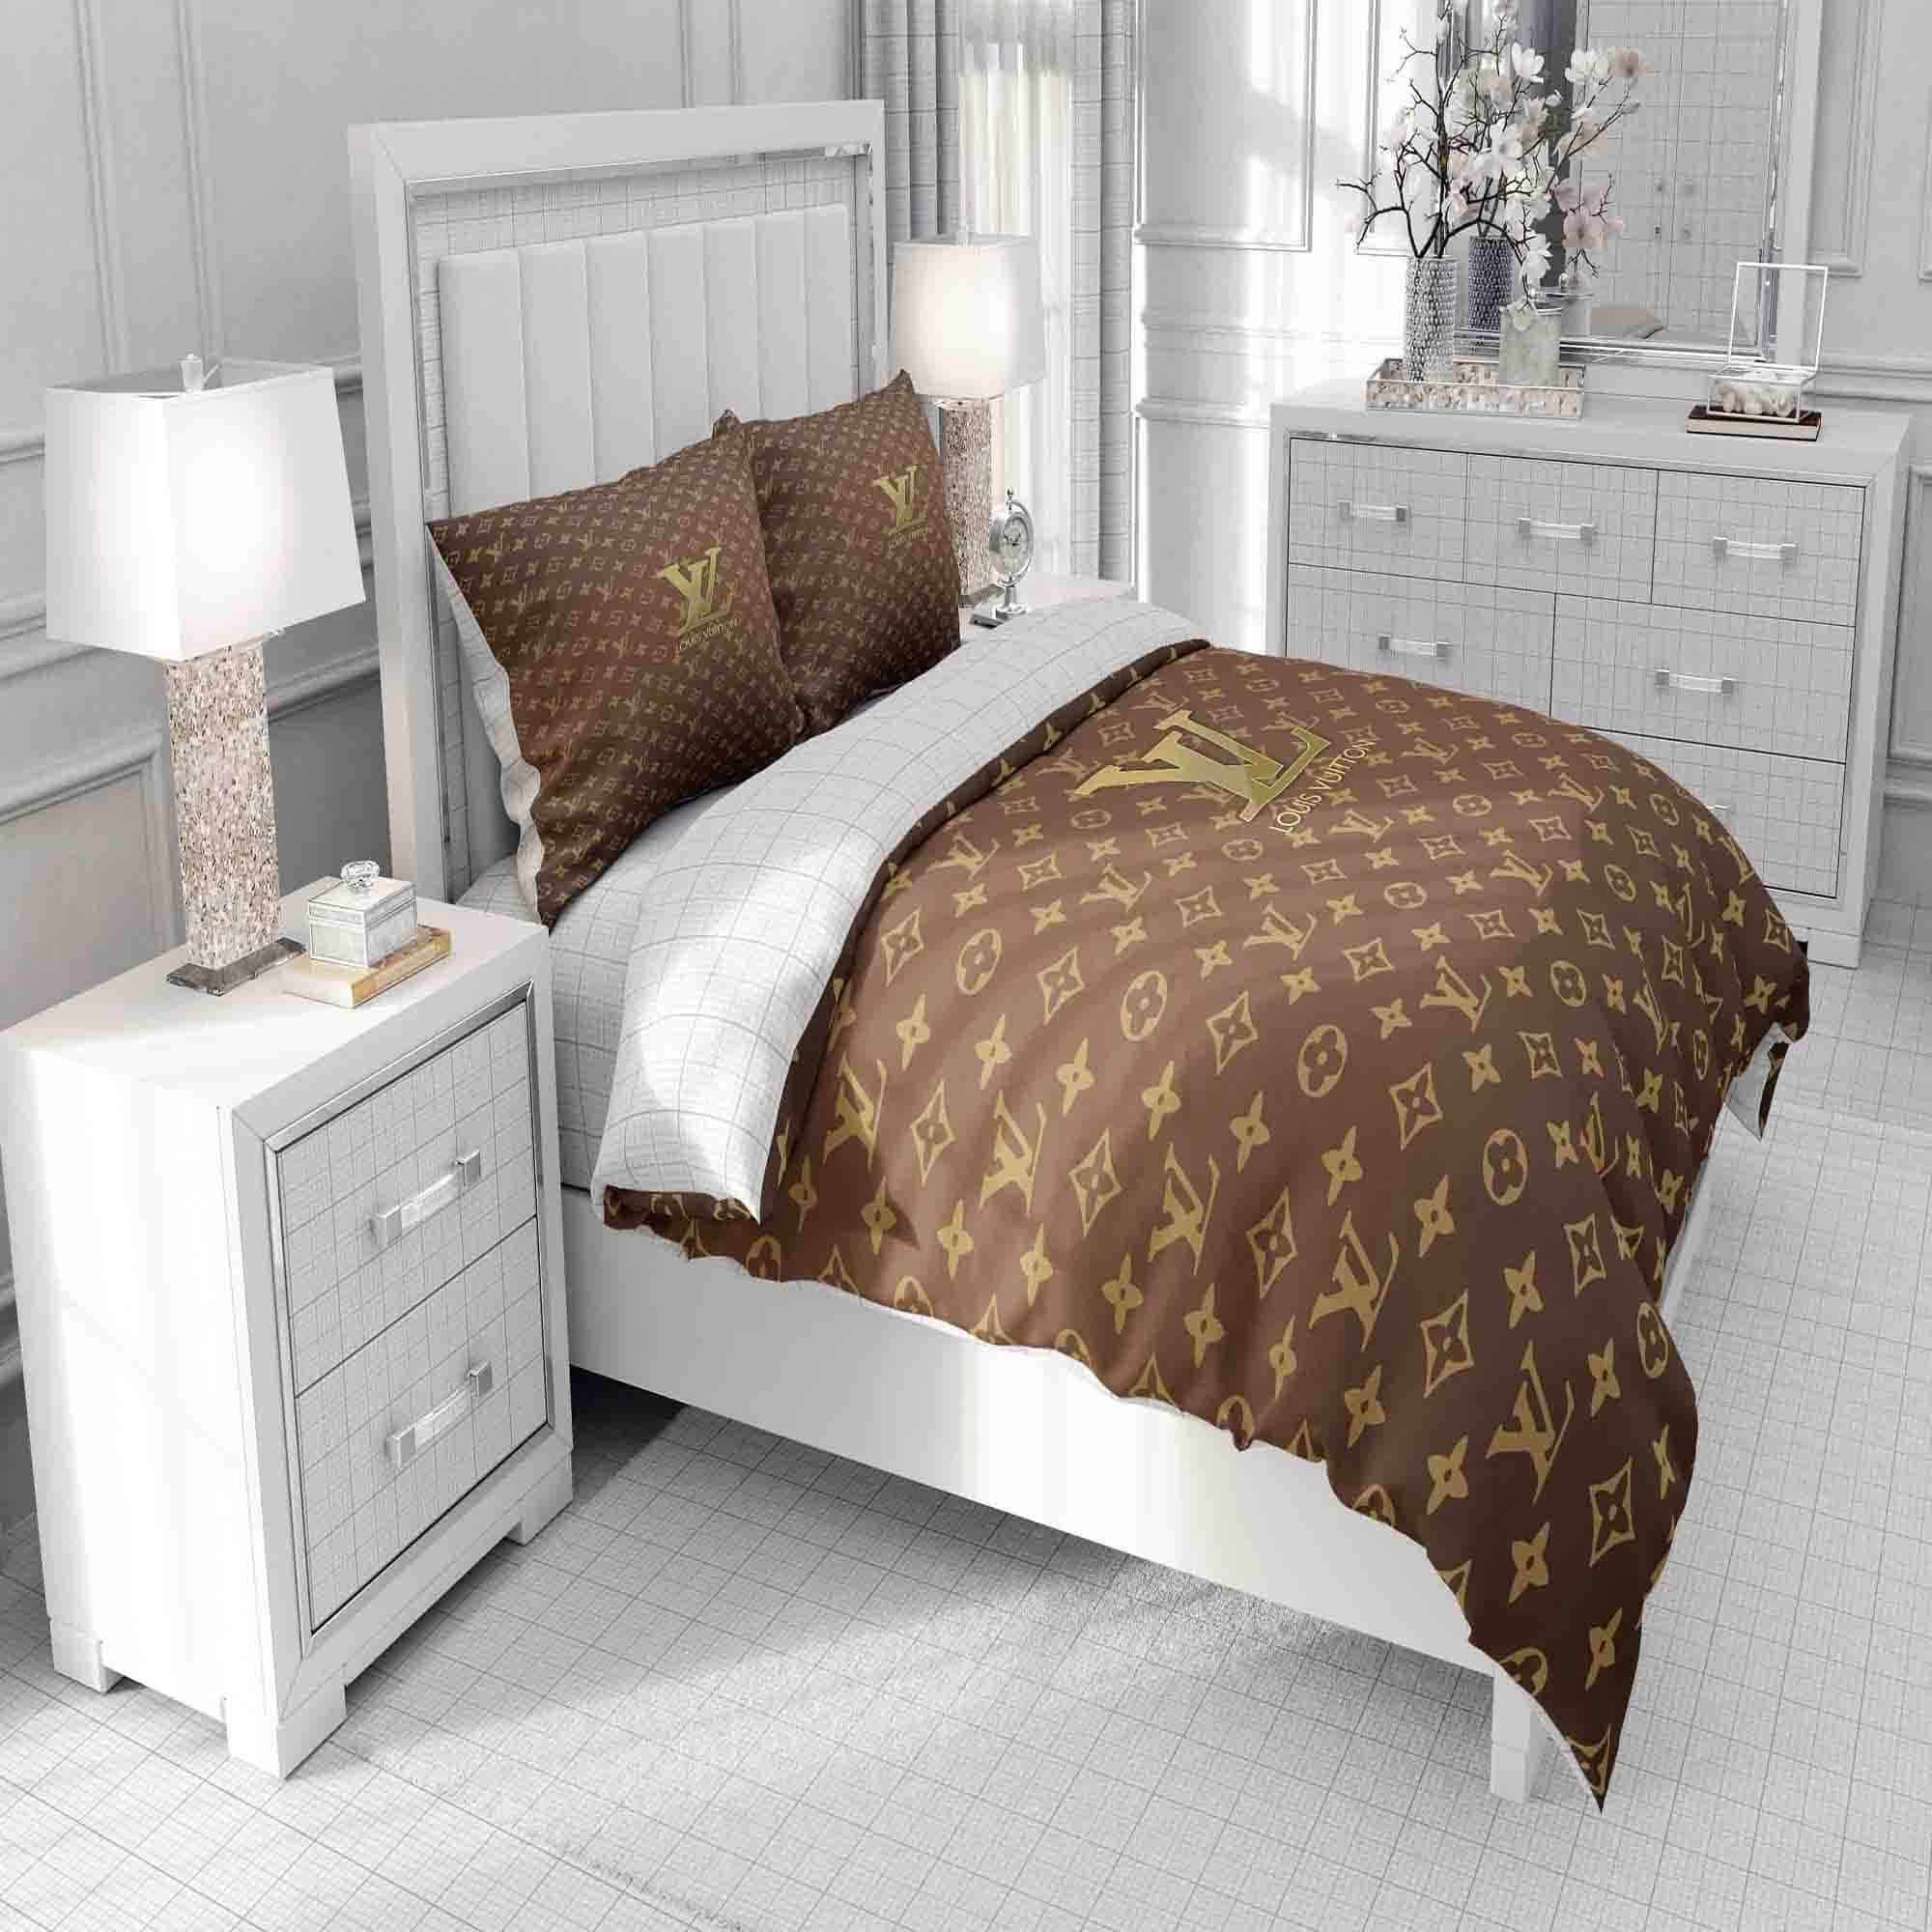 Luxury Louis Vuitton Bedspread and Duvet. in Abule Egba - Home Accessories,  Ife Light